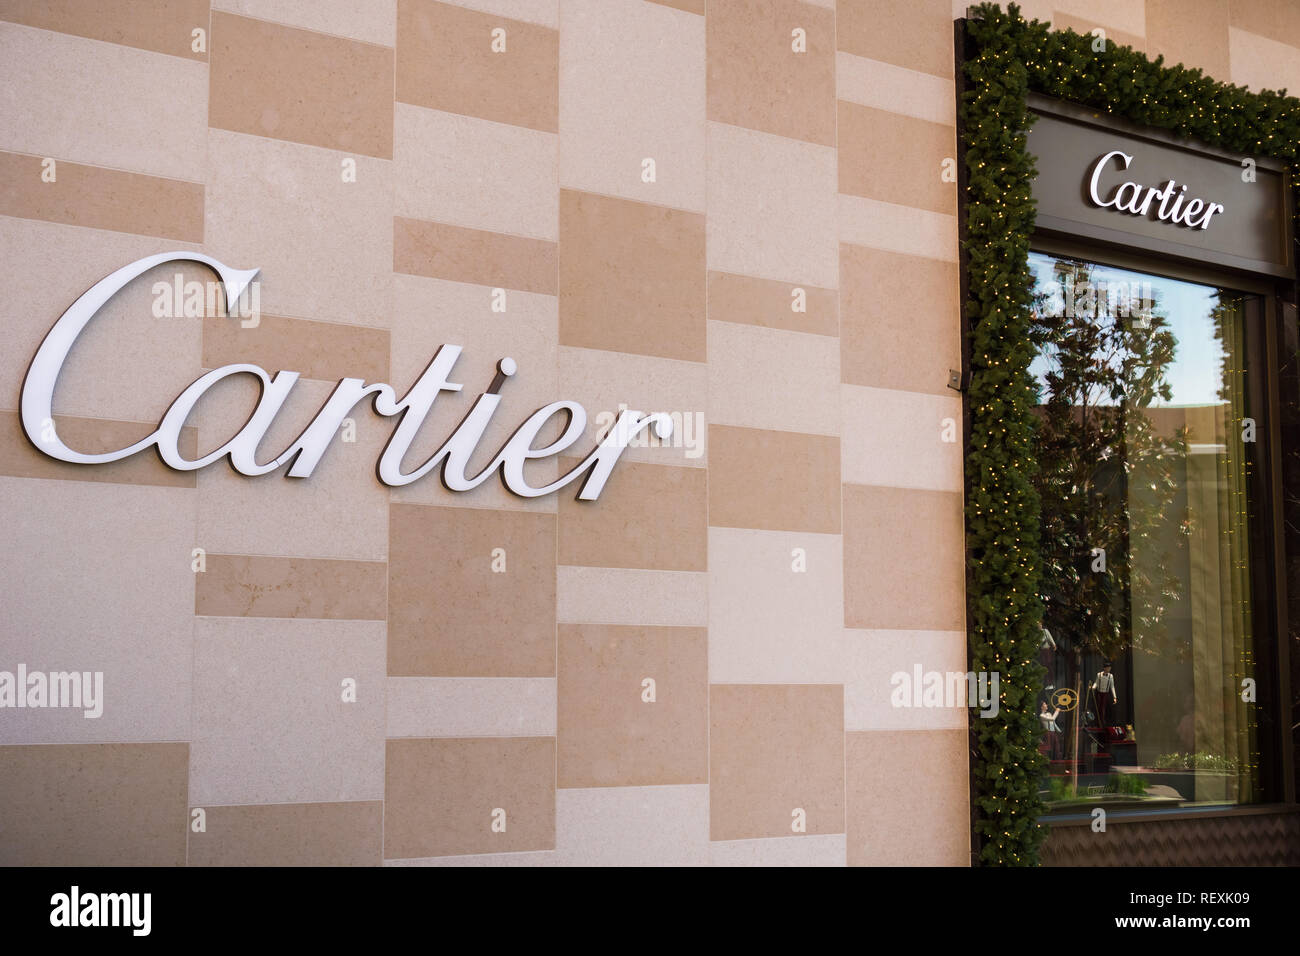 cartier store stanford